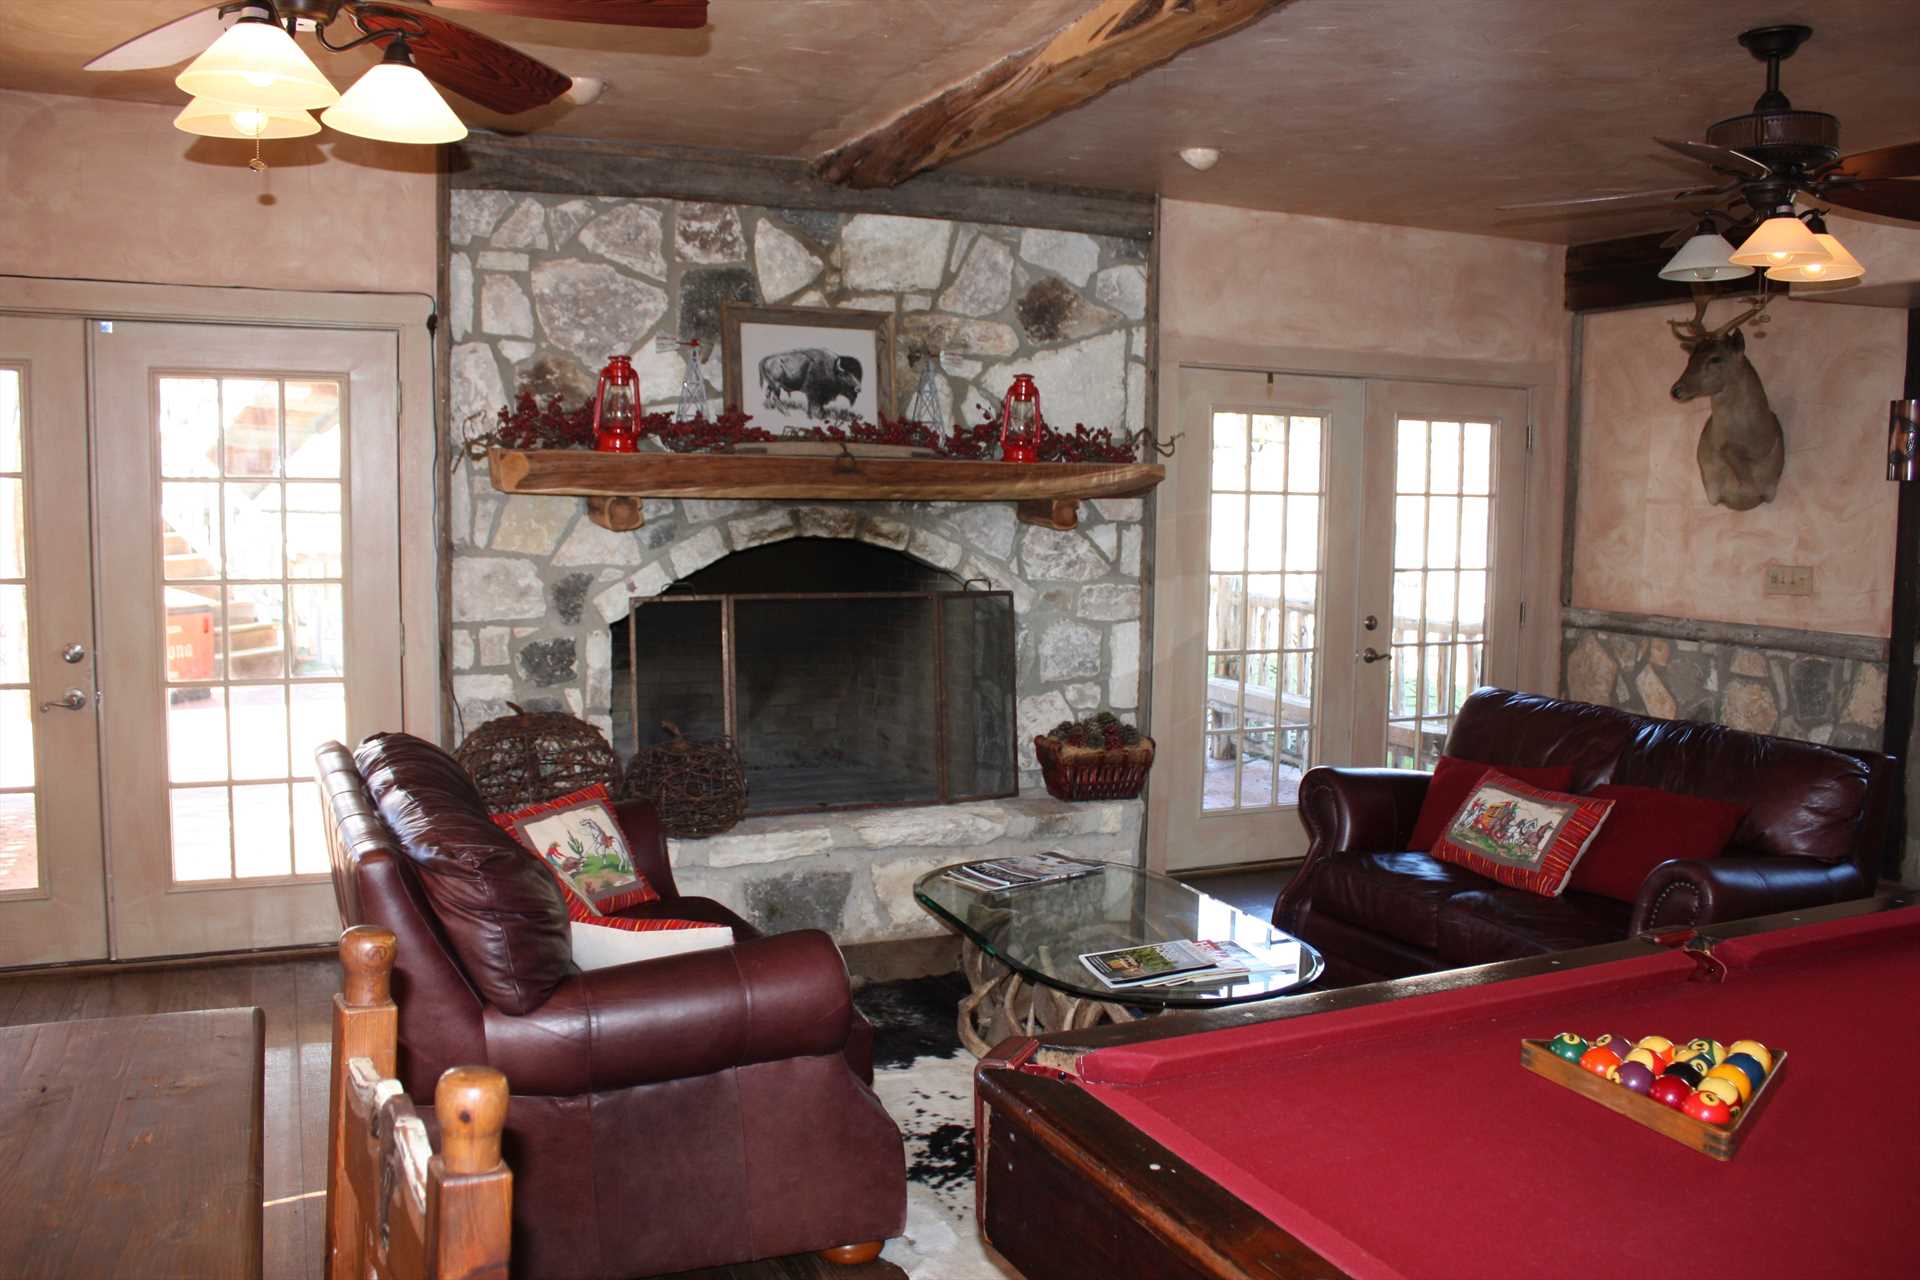                                                 Commune with your fellow guests in climate-controlled comfort, on the main floor of the lodge, you'll find both a fireplace and pool table.